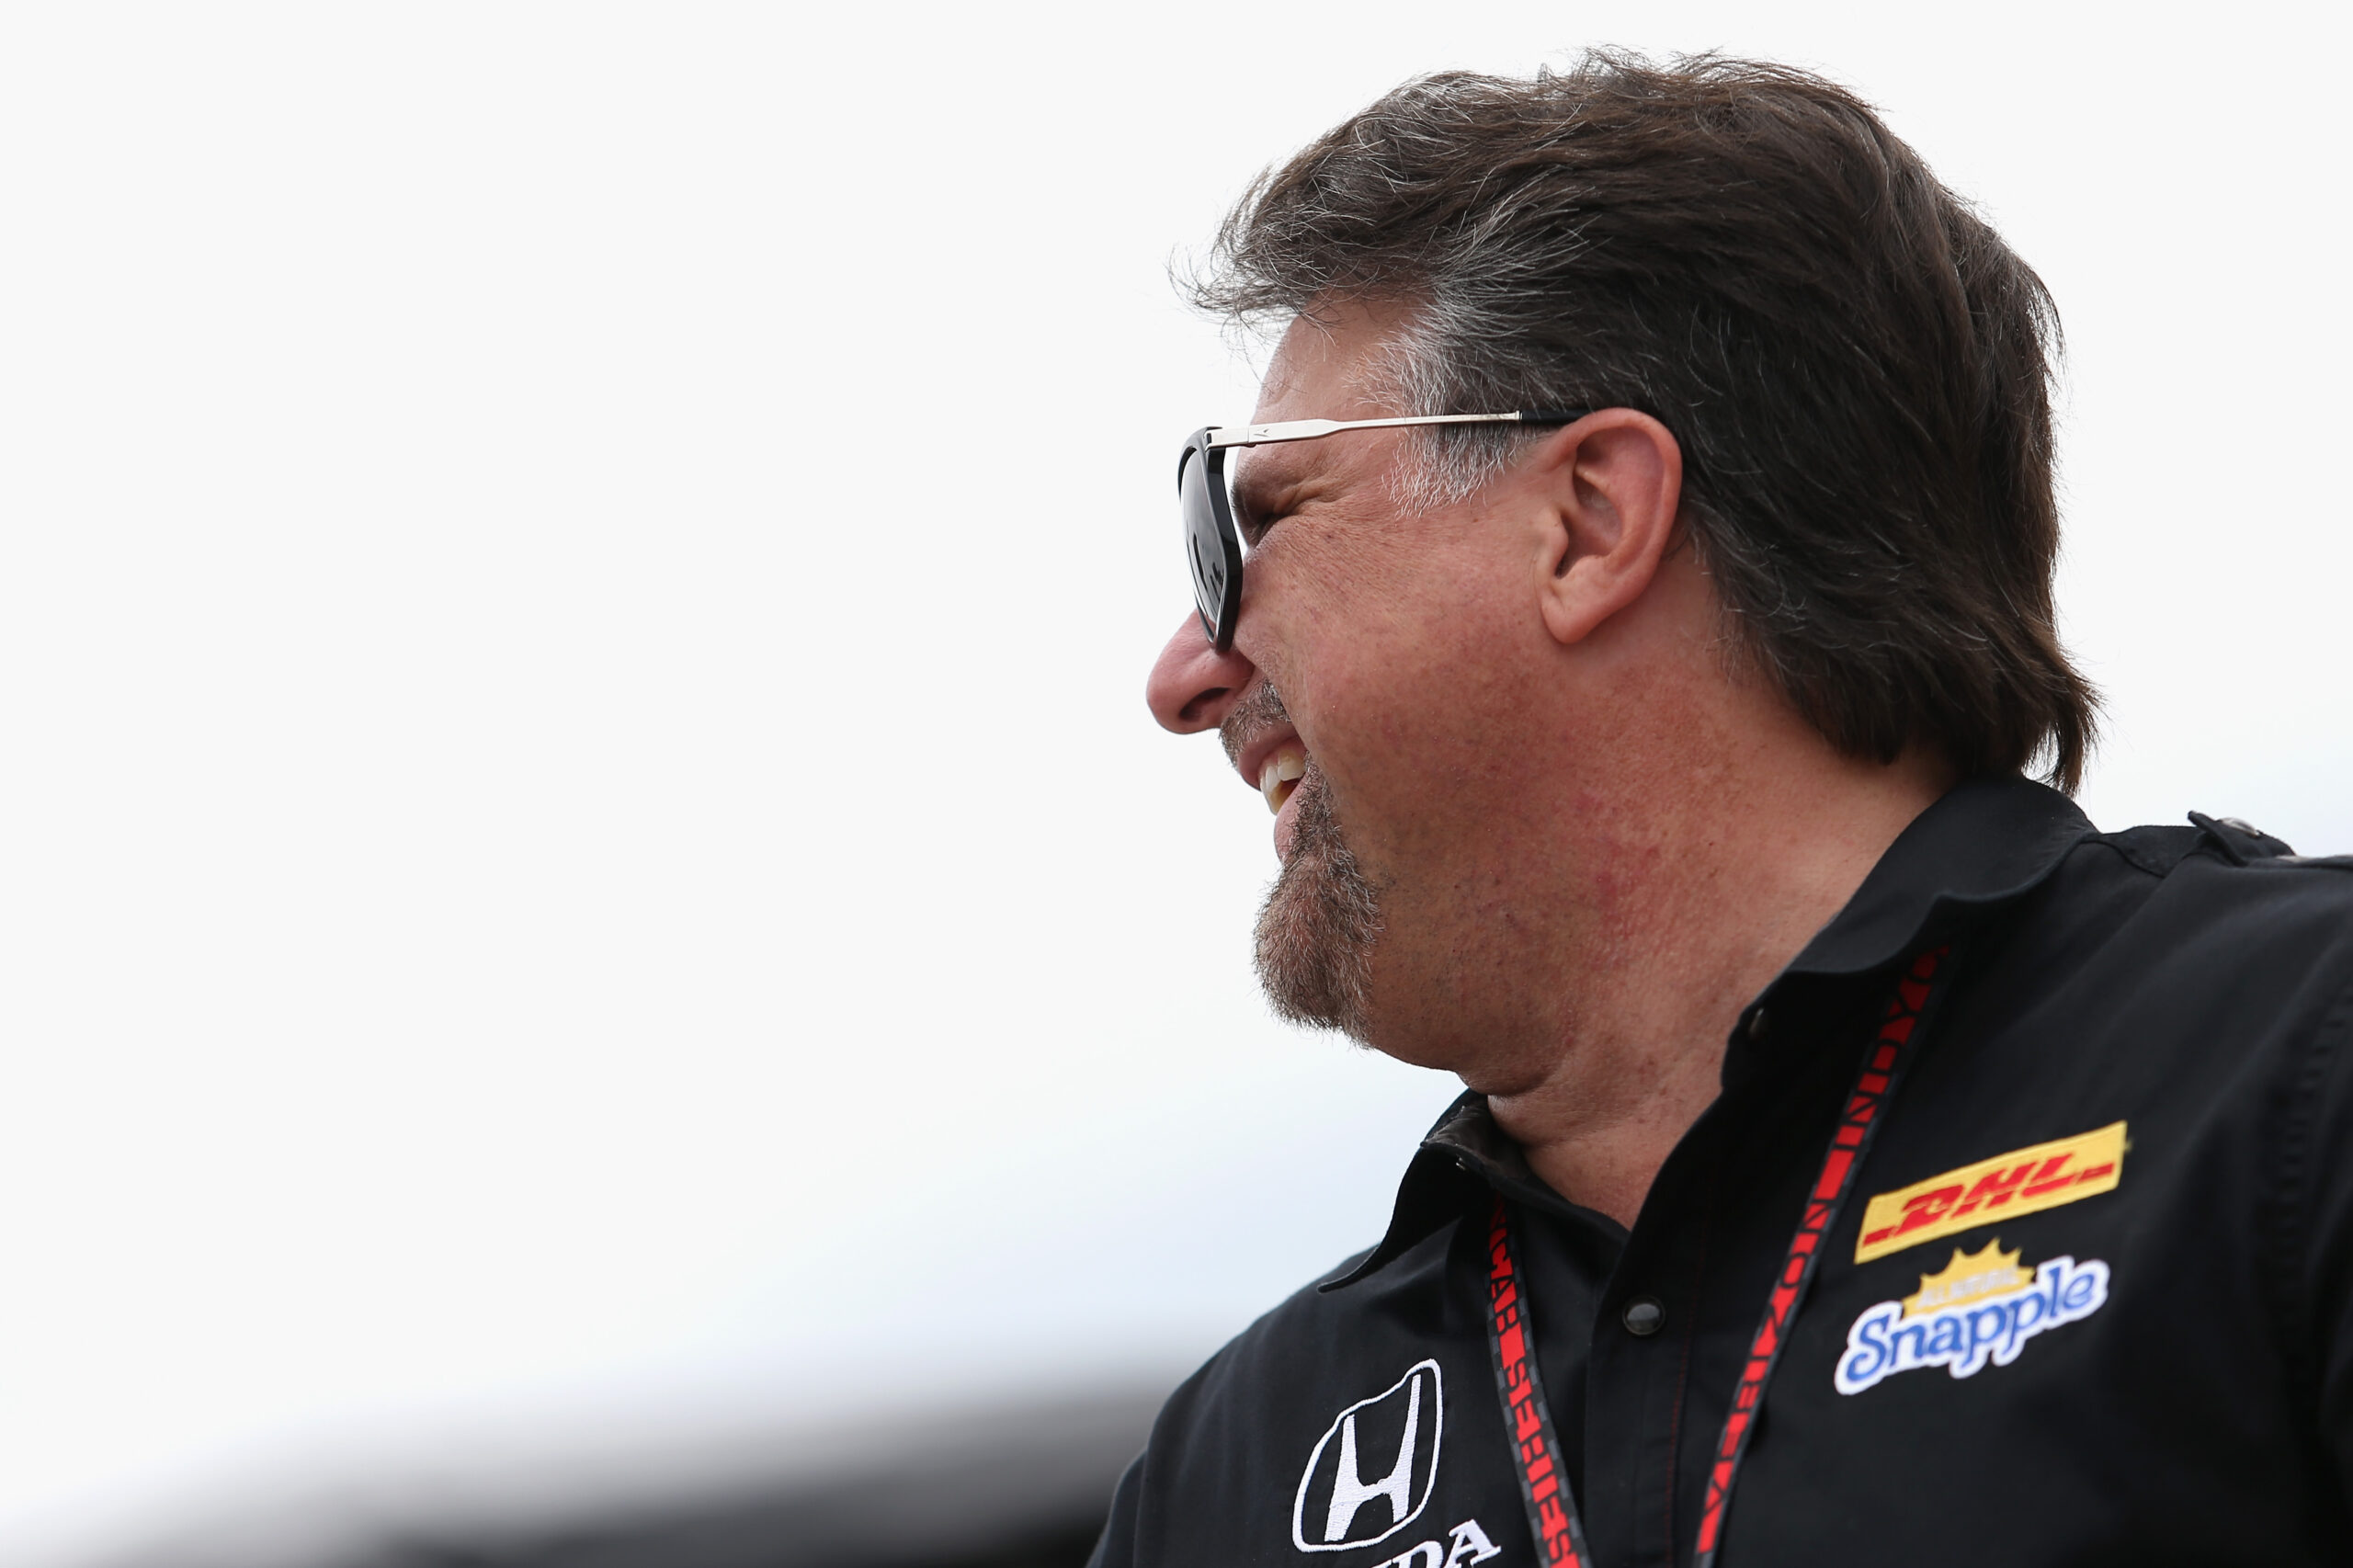 The Andretti name is one step closer to the F1 grid